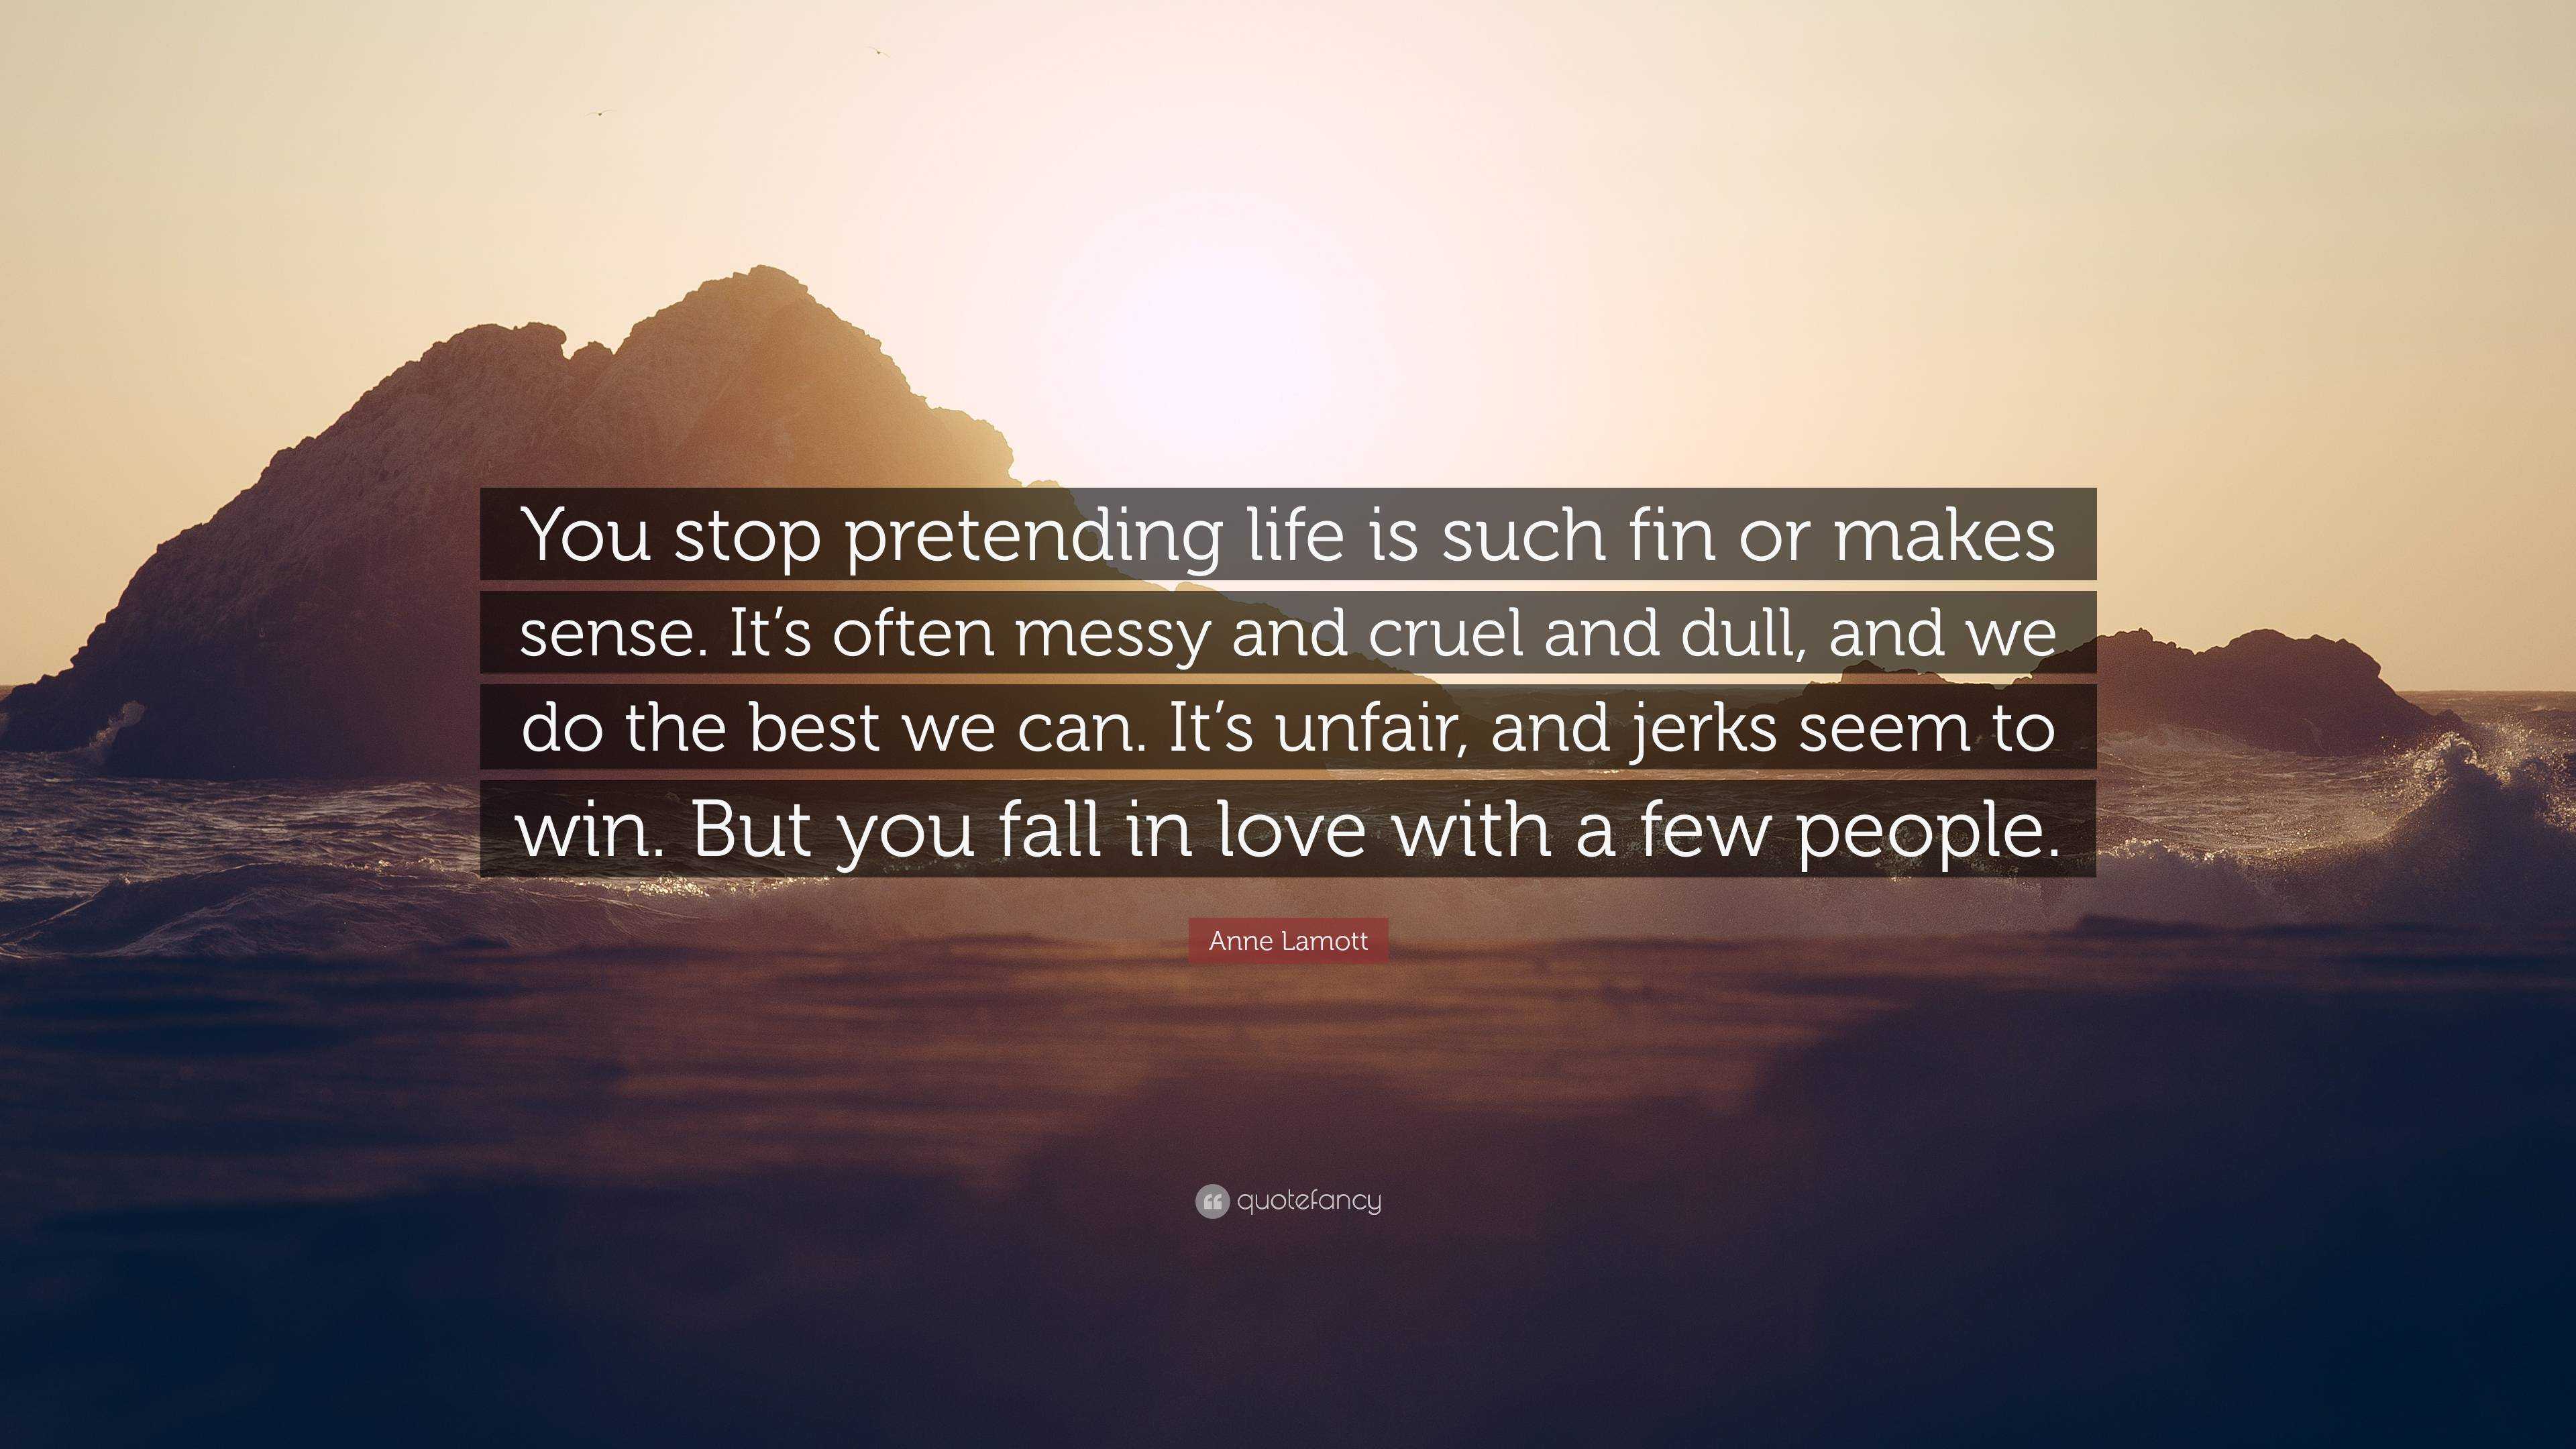 Anne Lamott Quote: “You stop pretending life is such fin or makes sense ...